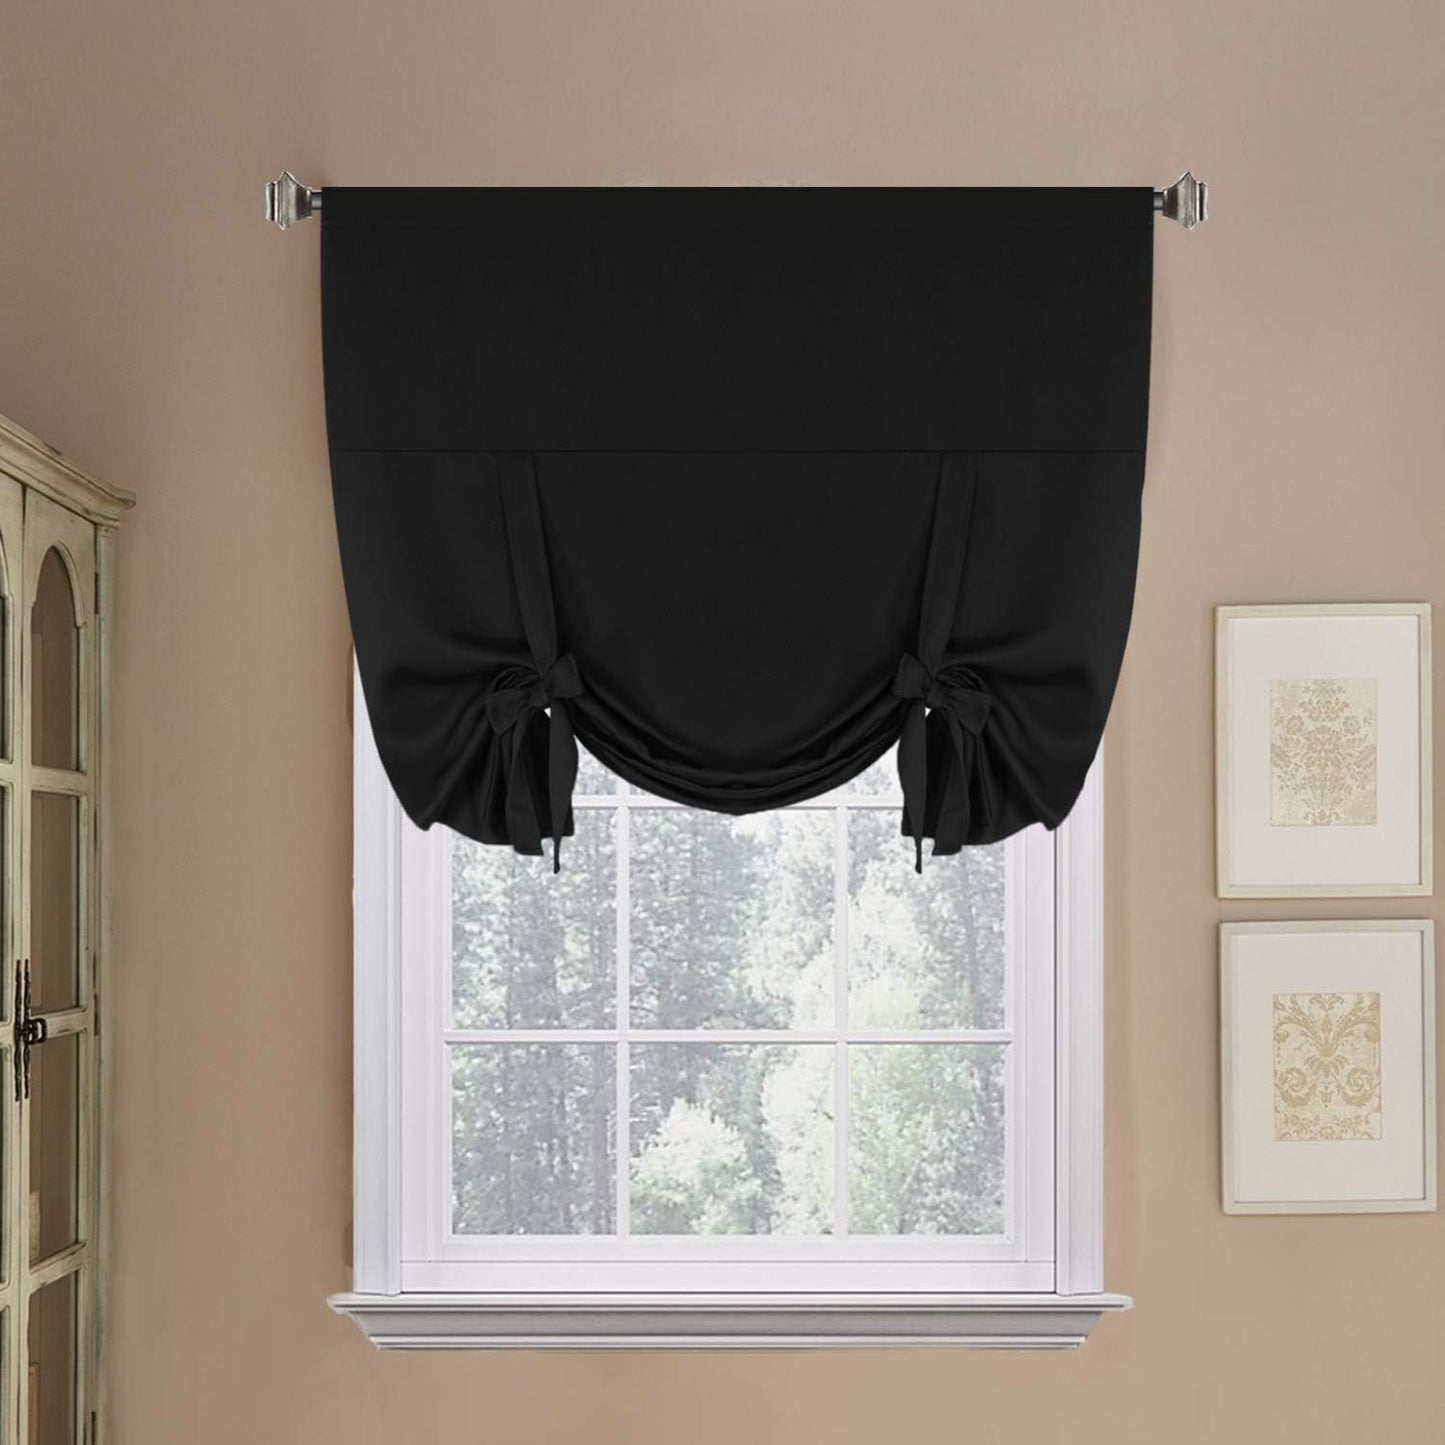 H.VERSAILTEX Tie up Curtain Thermal Insulated Room Darkening Rod Pocket Valance for Bedroom (Coral, 1 Panel, 42 Inches W X 63 Inches L)  H.VERSAILTEX Jet Black W42" X L63" 1-Pack 